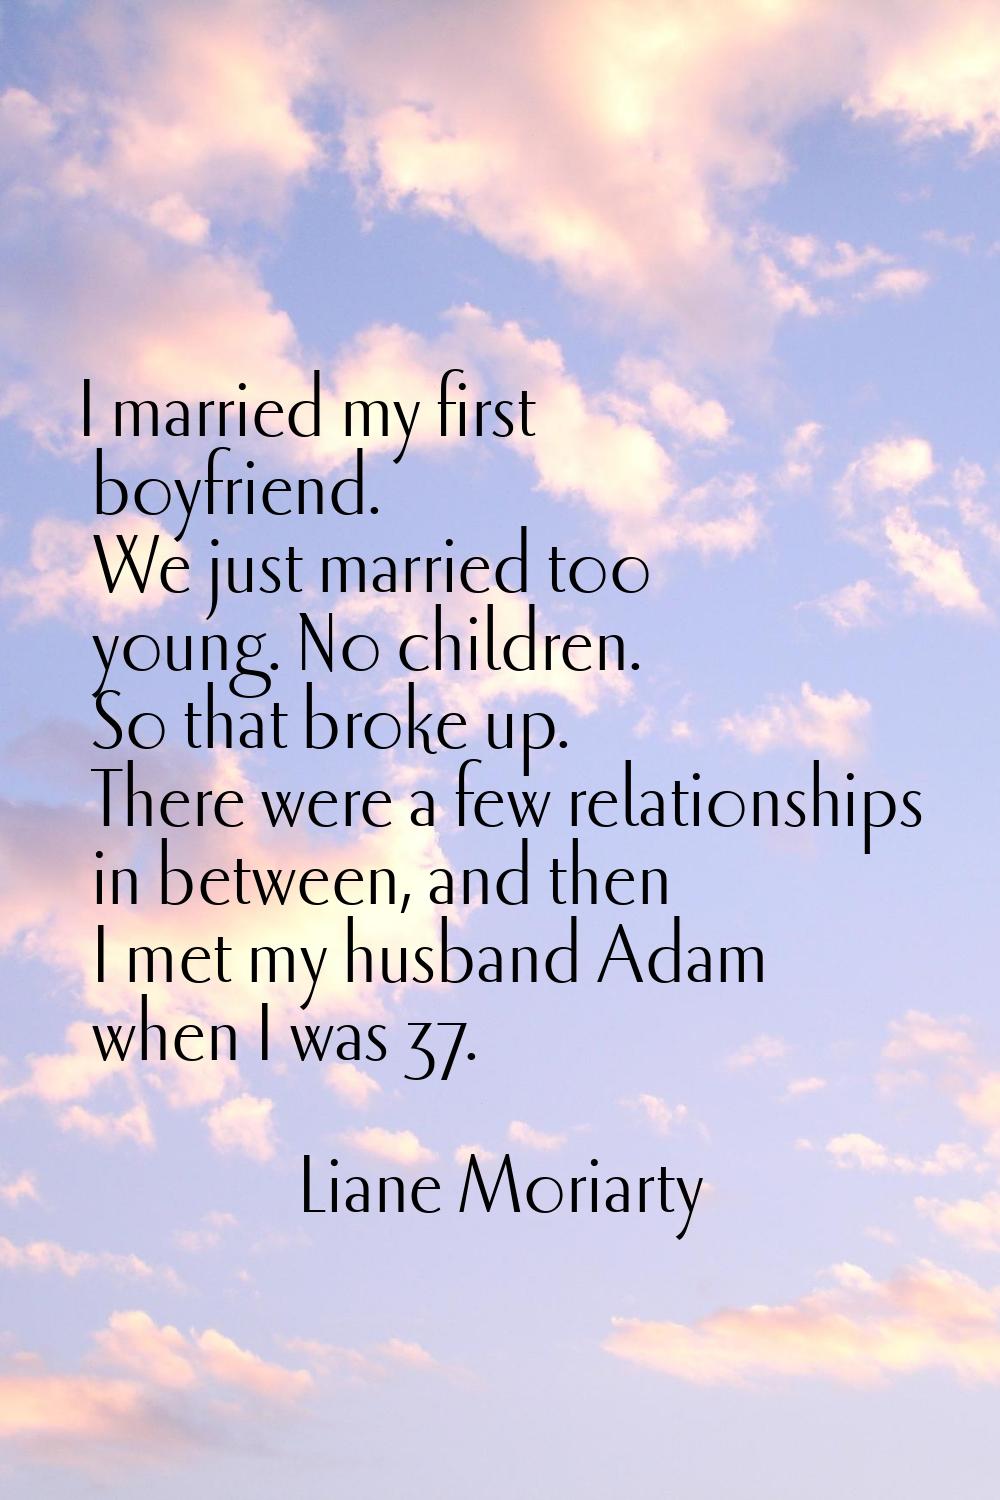 I married my first boyfriend. We just married too young. No children. So that broke up. There were 